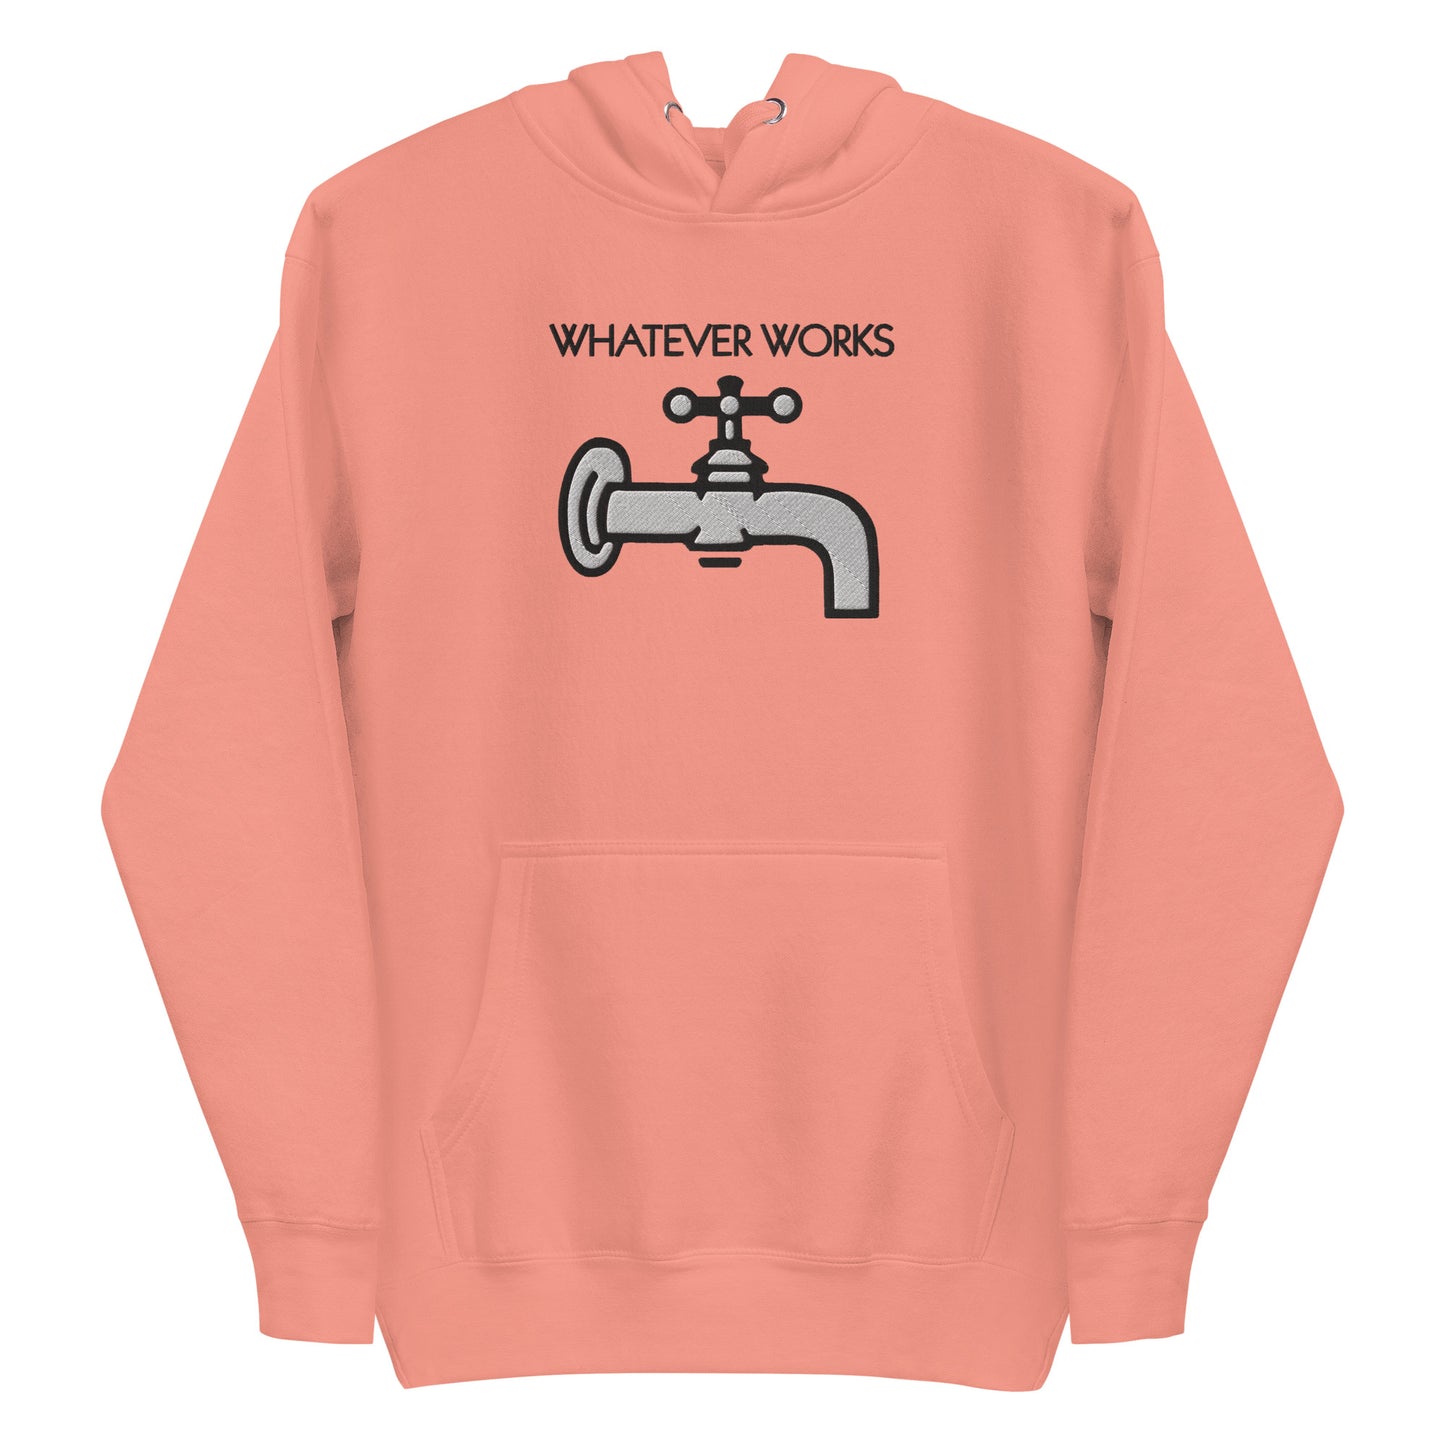 Whatever Works embroidered hoodie